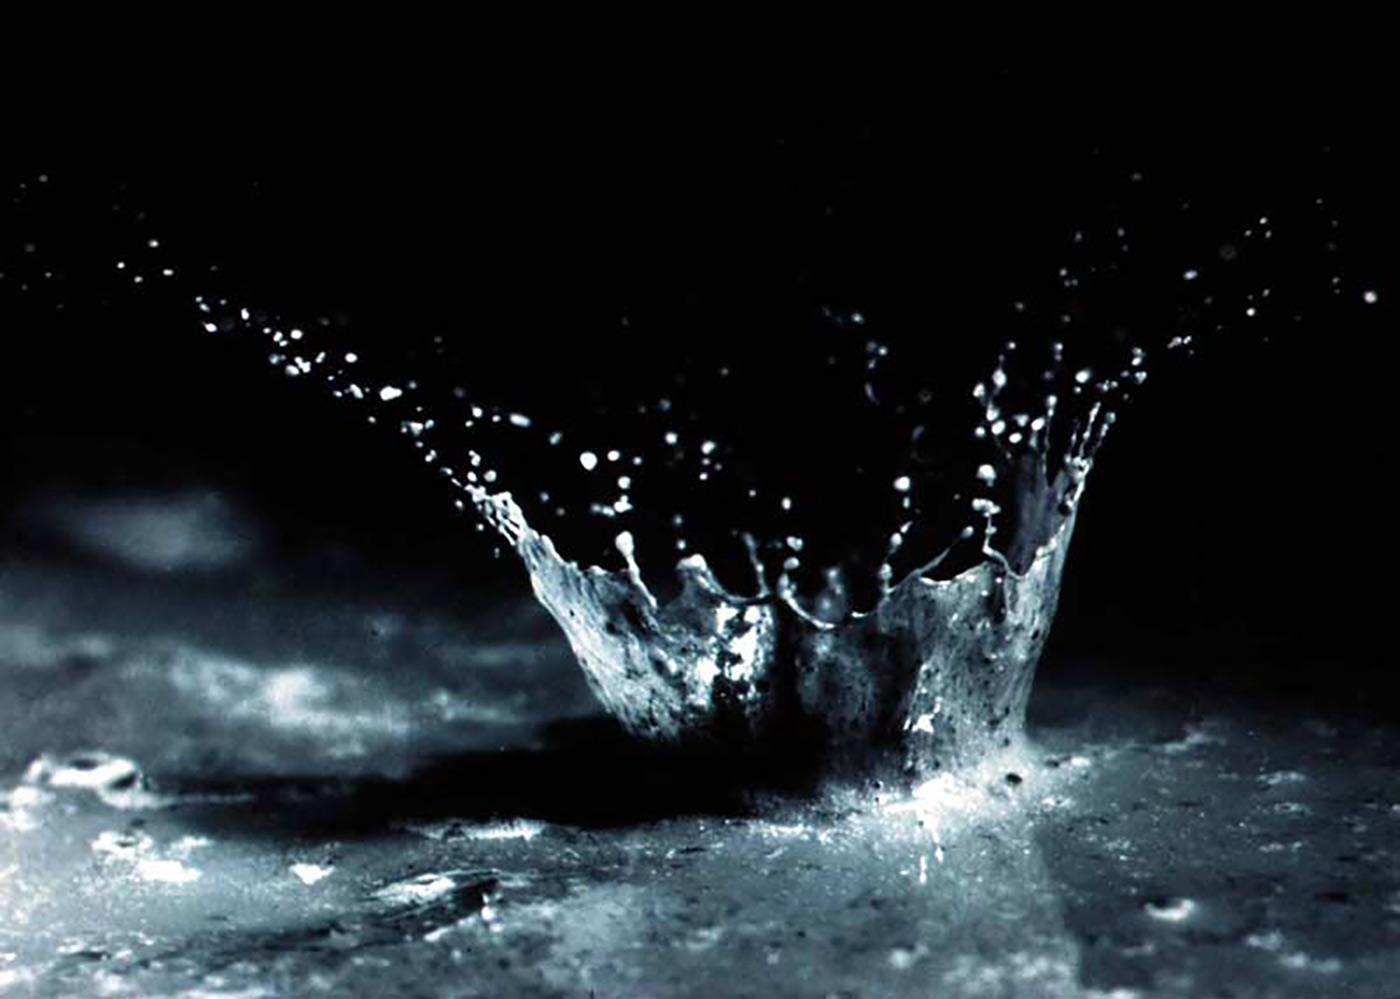 A close-up of water and soil being splashed by the impact of a single raindrop.